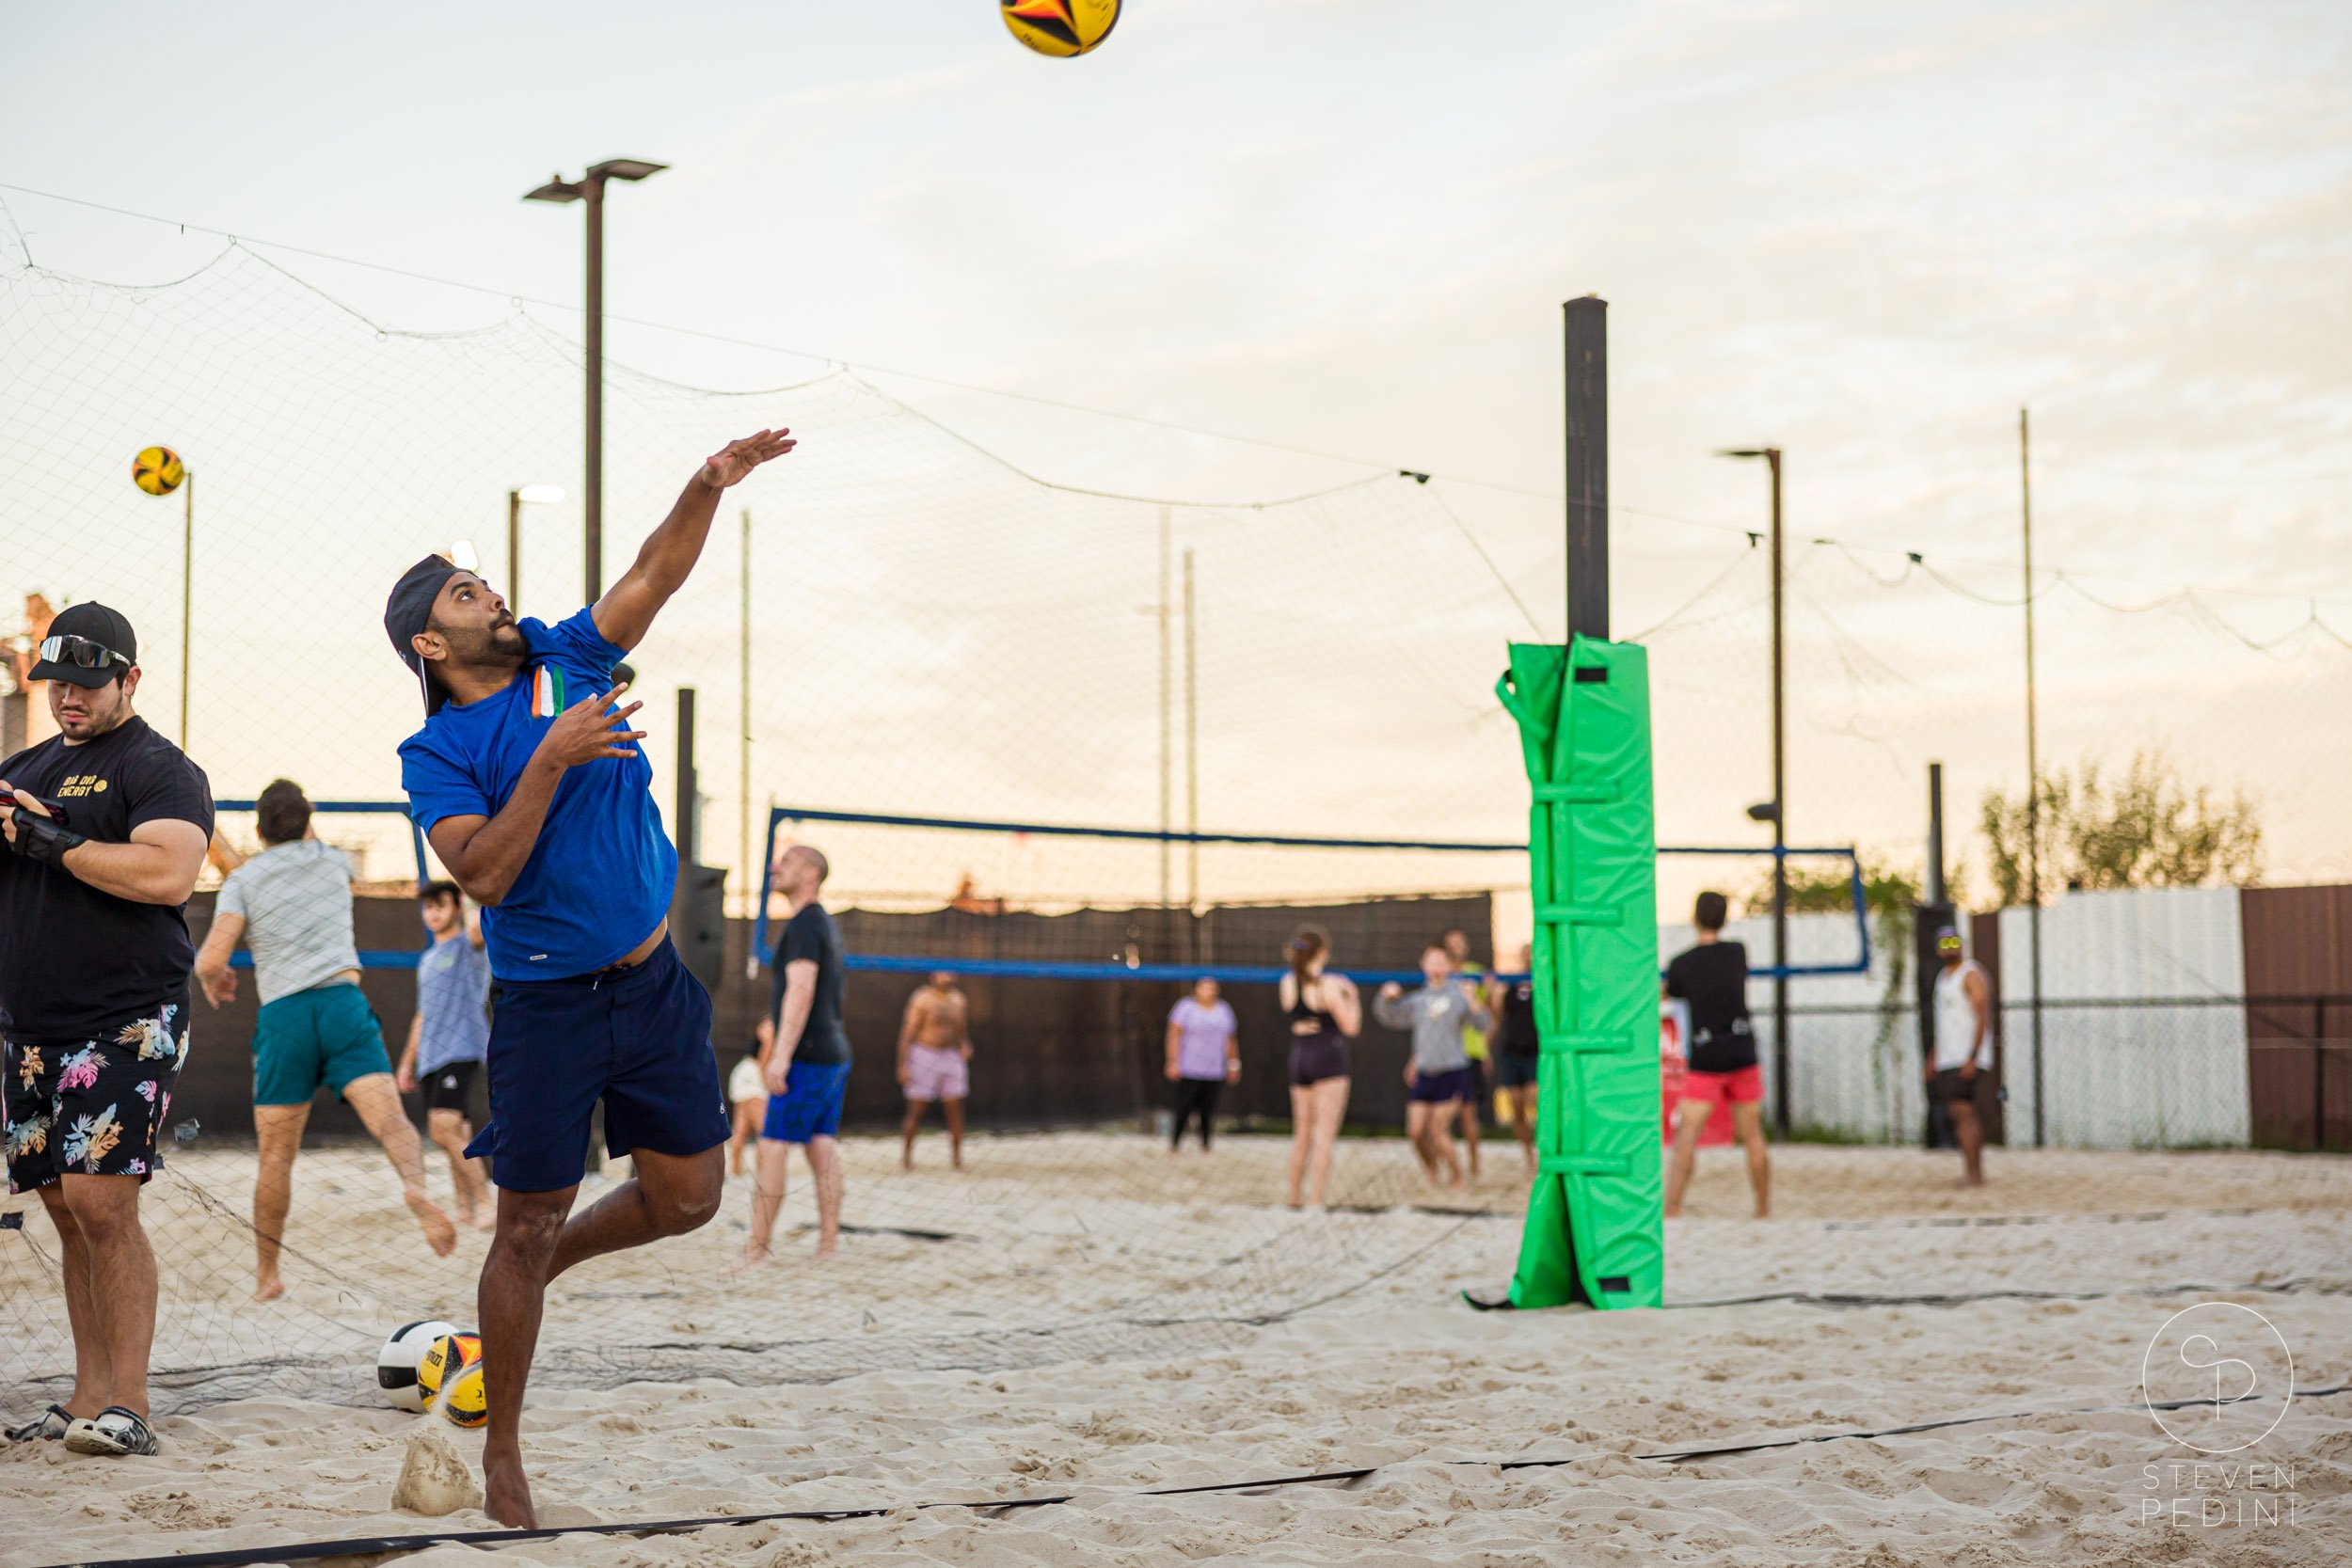 Steven Pedini Photography - Bumpy Pickle - Sand Volleyball - Houston TX - World Cup of Volleyball - 00222.jpg